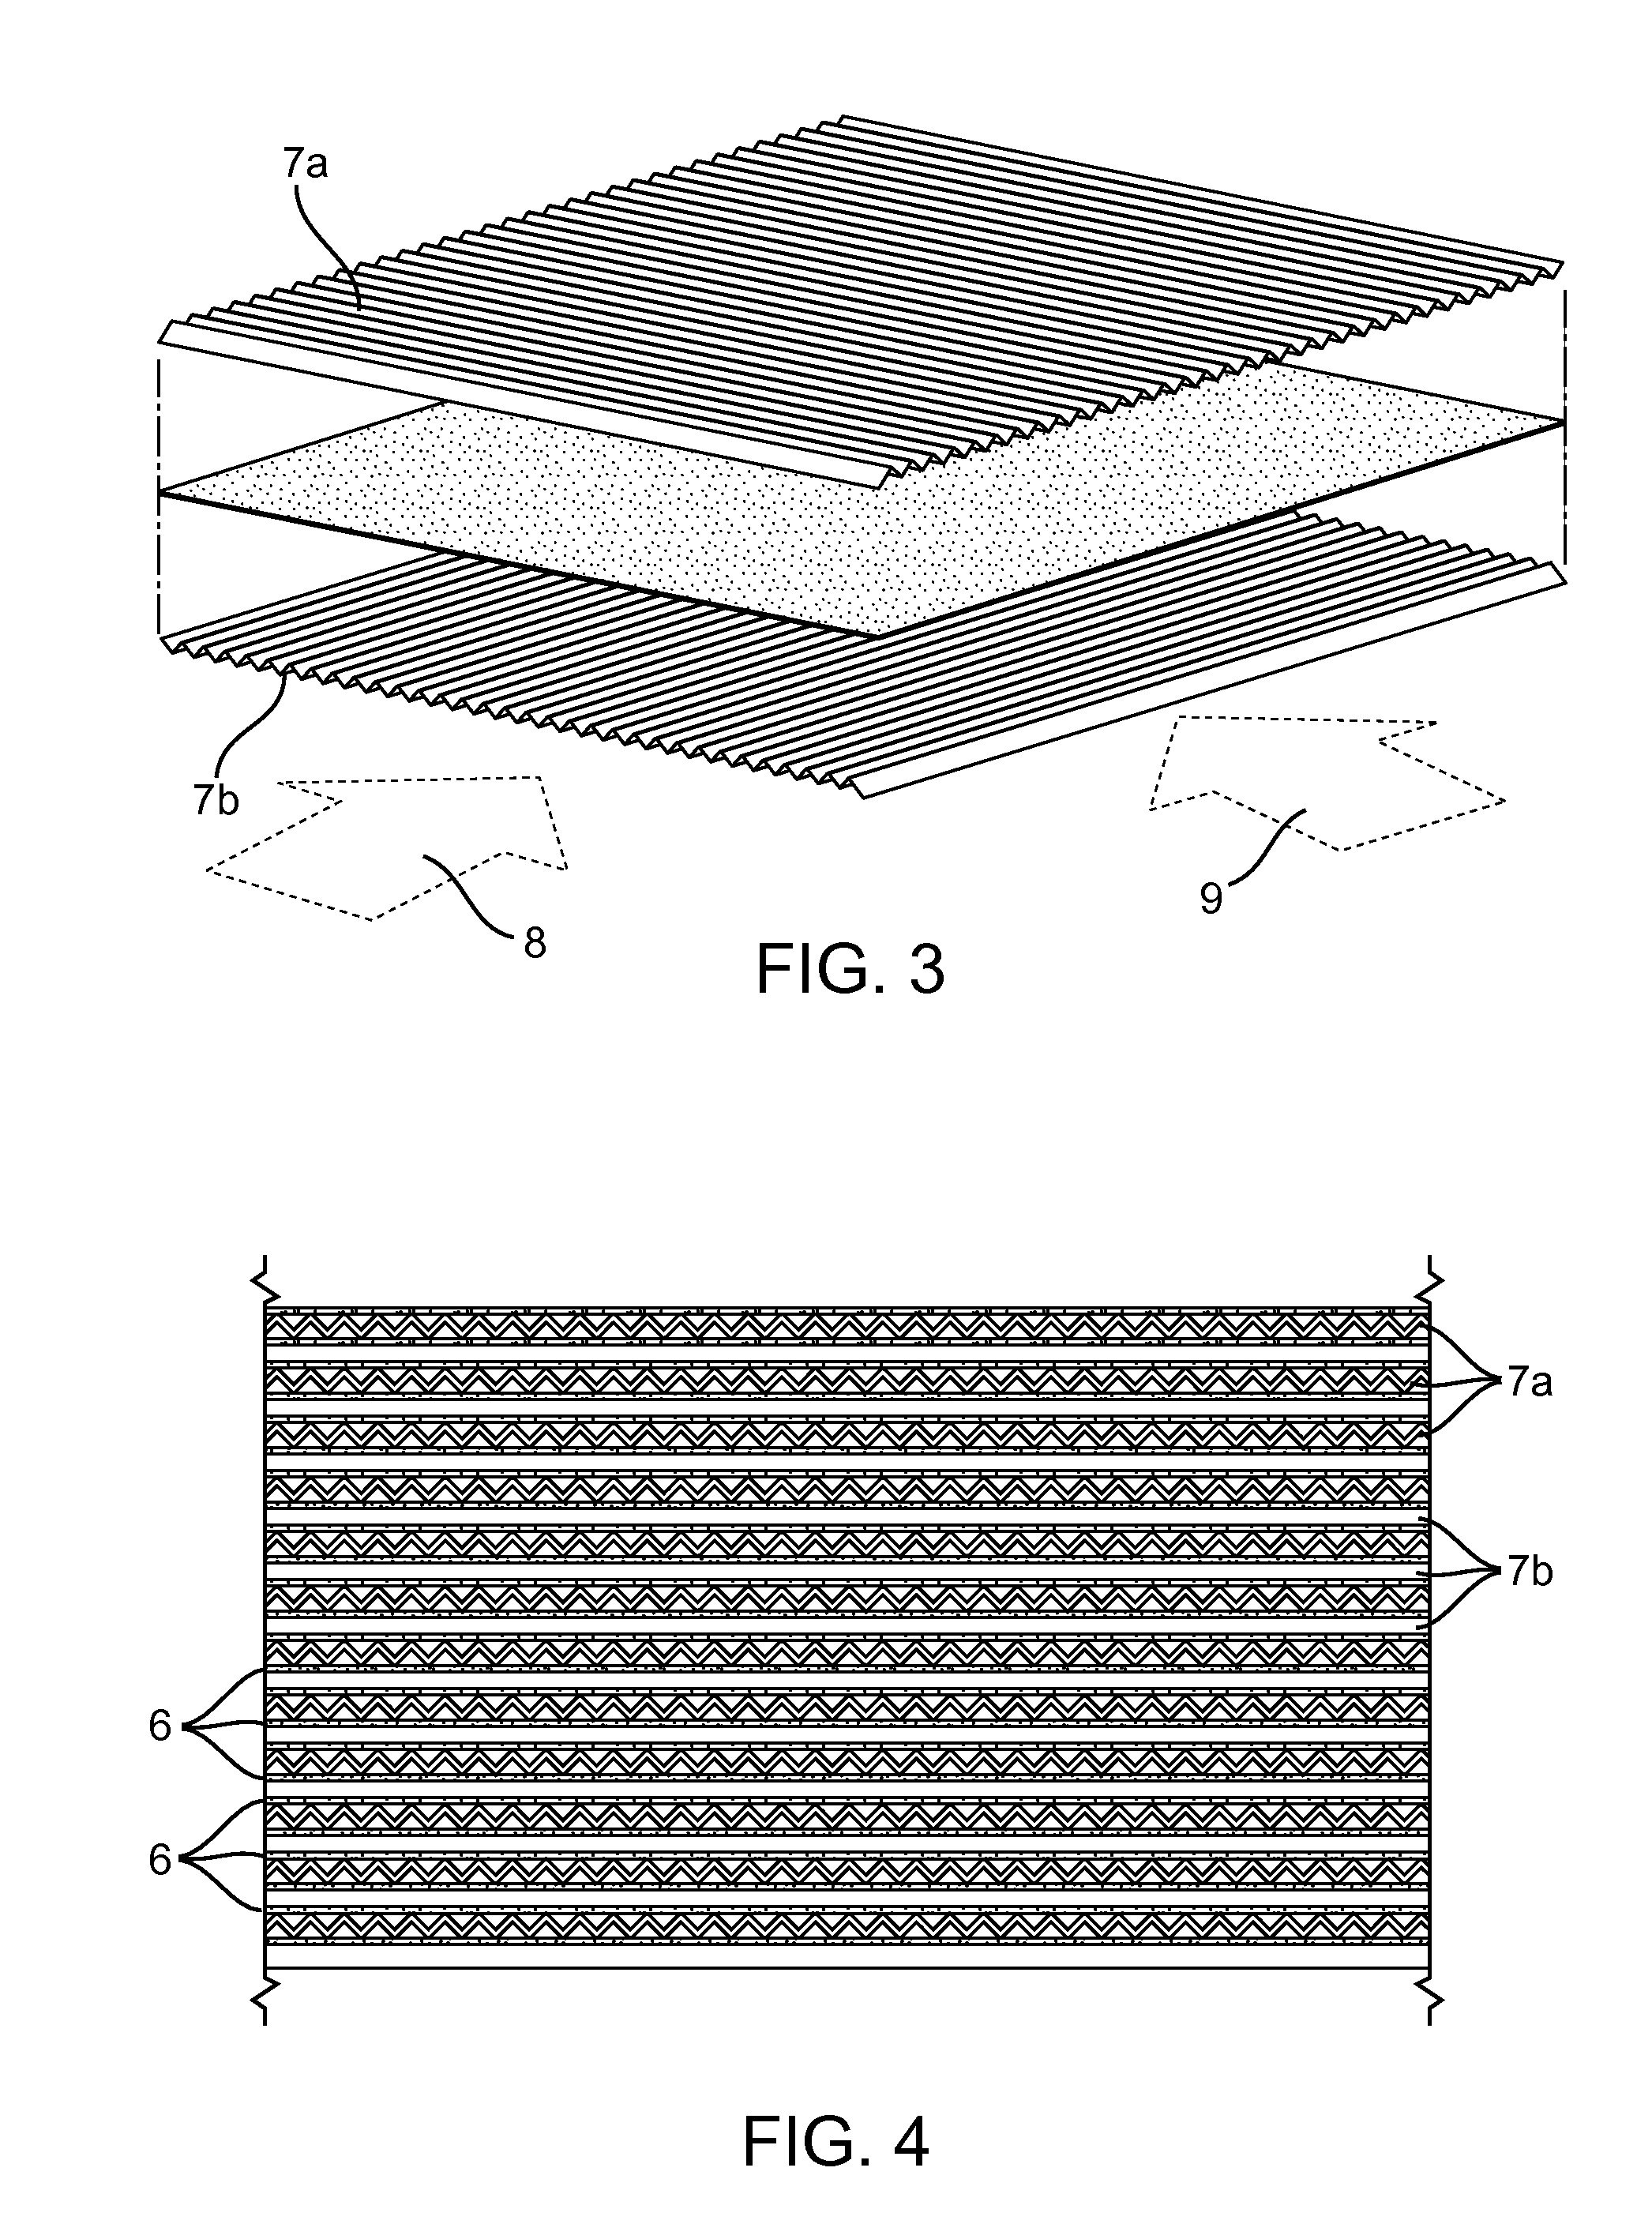 Energy Recovery Ventilation Sulfonated Block Copolymer Laminate Membrane